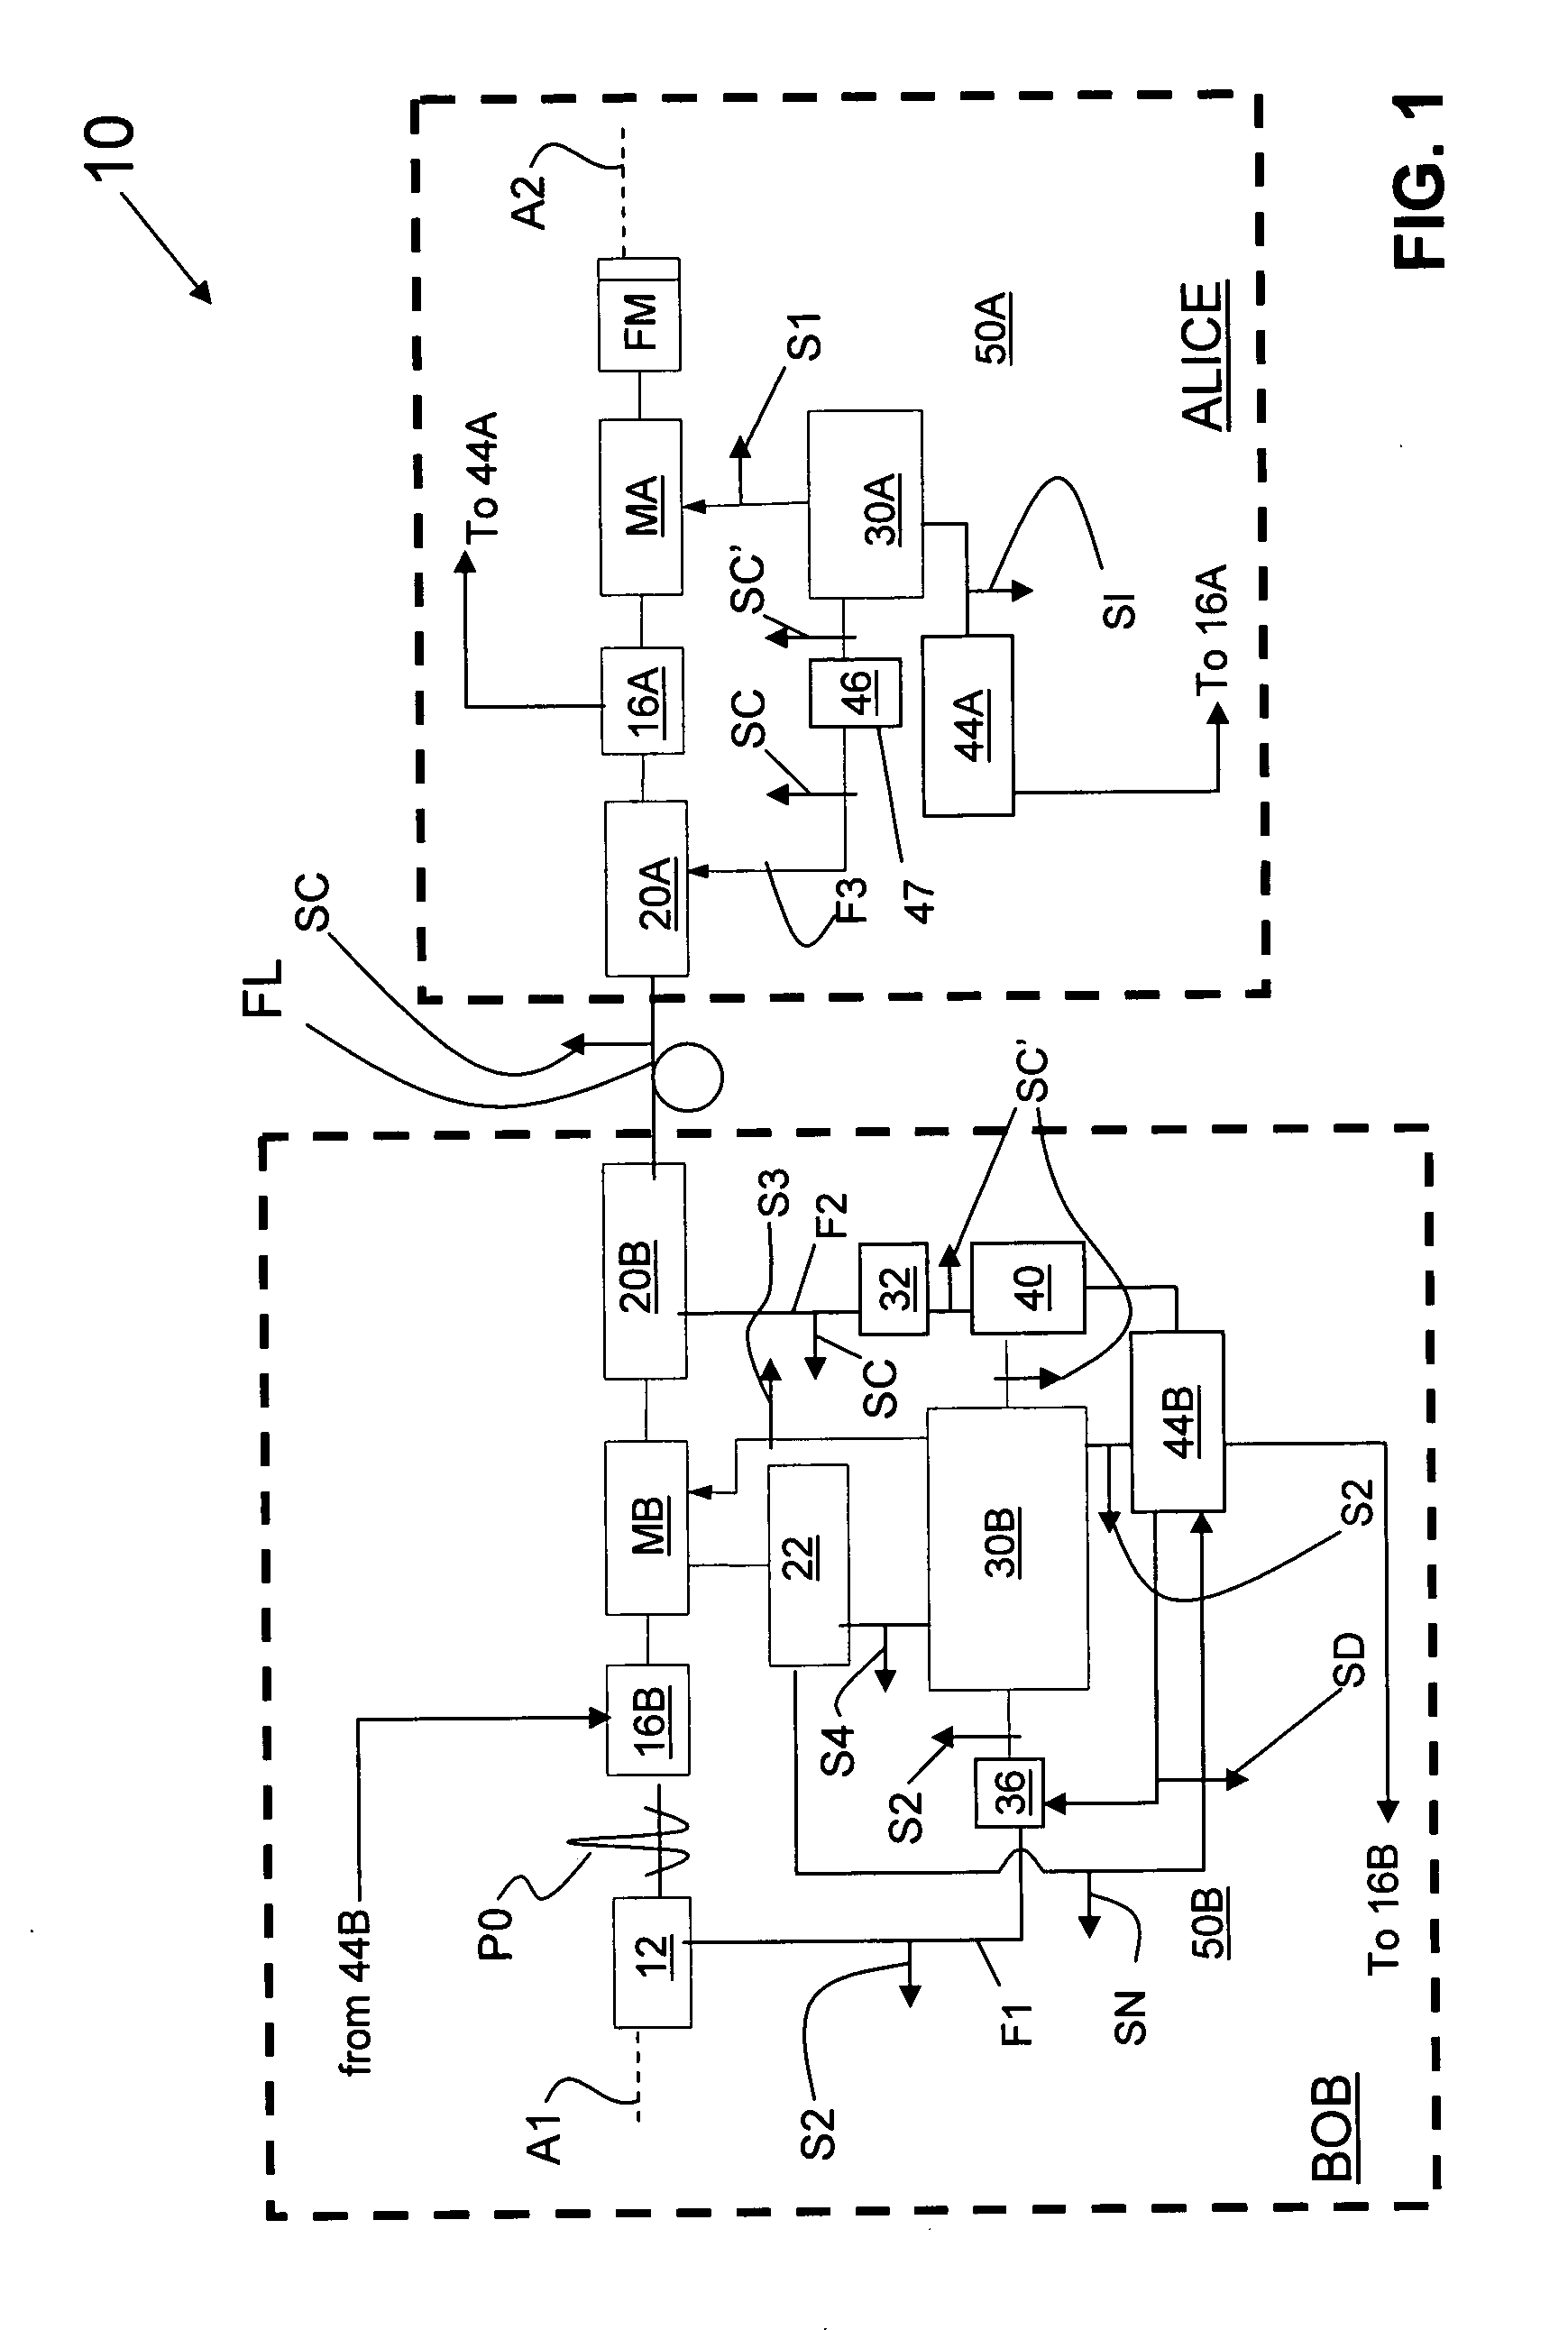 One-way synchronization of a two-way QKD system